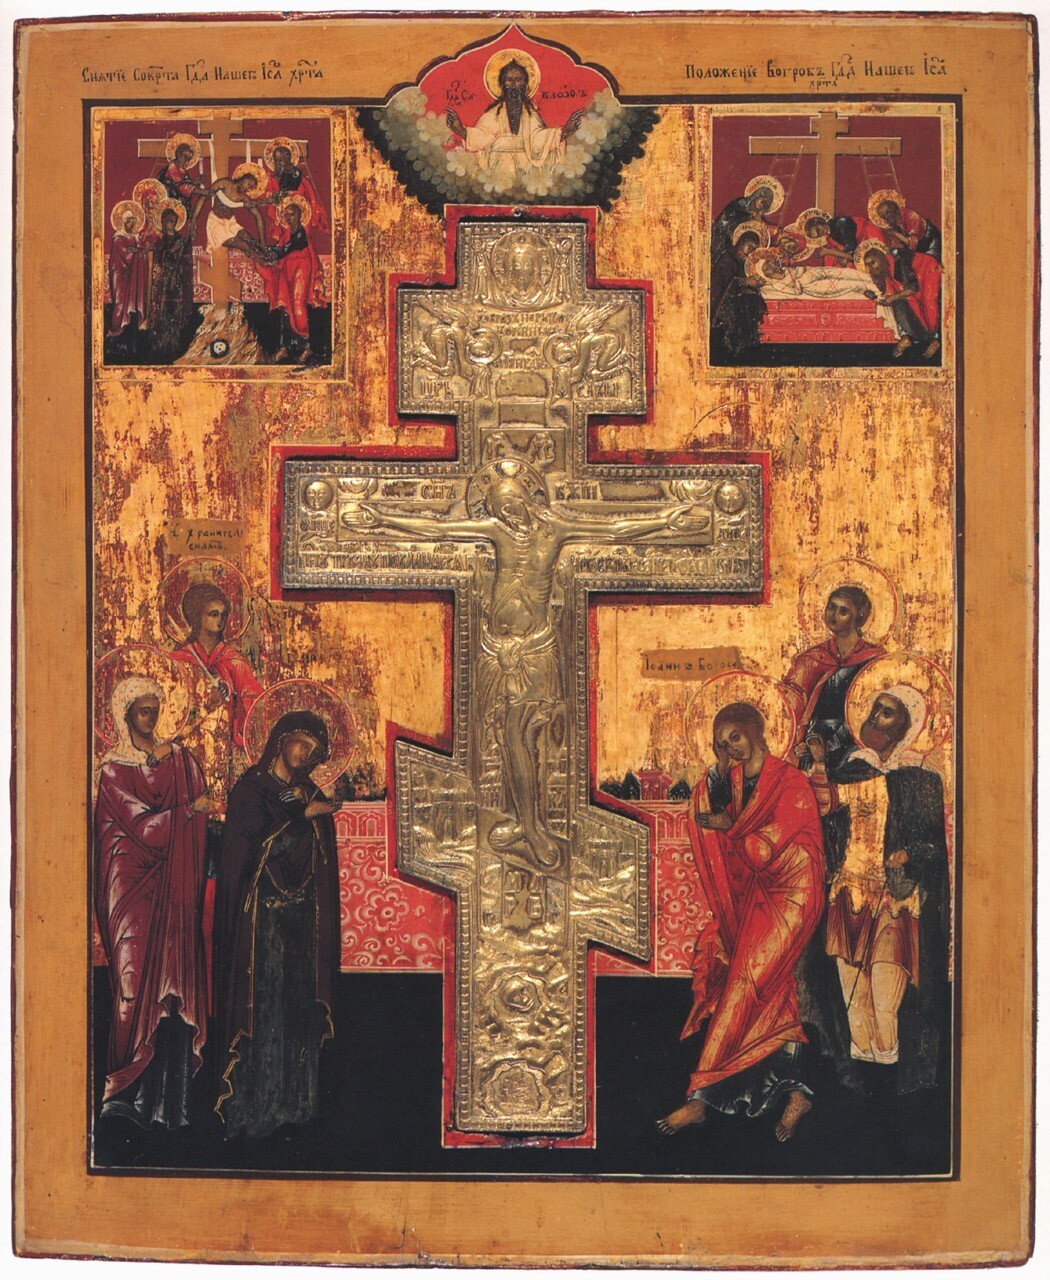 Bronze Cross Inserted in the “Crucifixion with Onlookers” icon